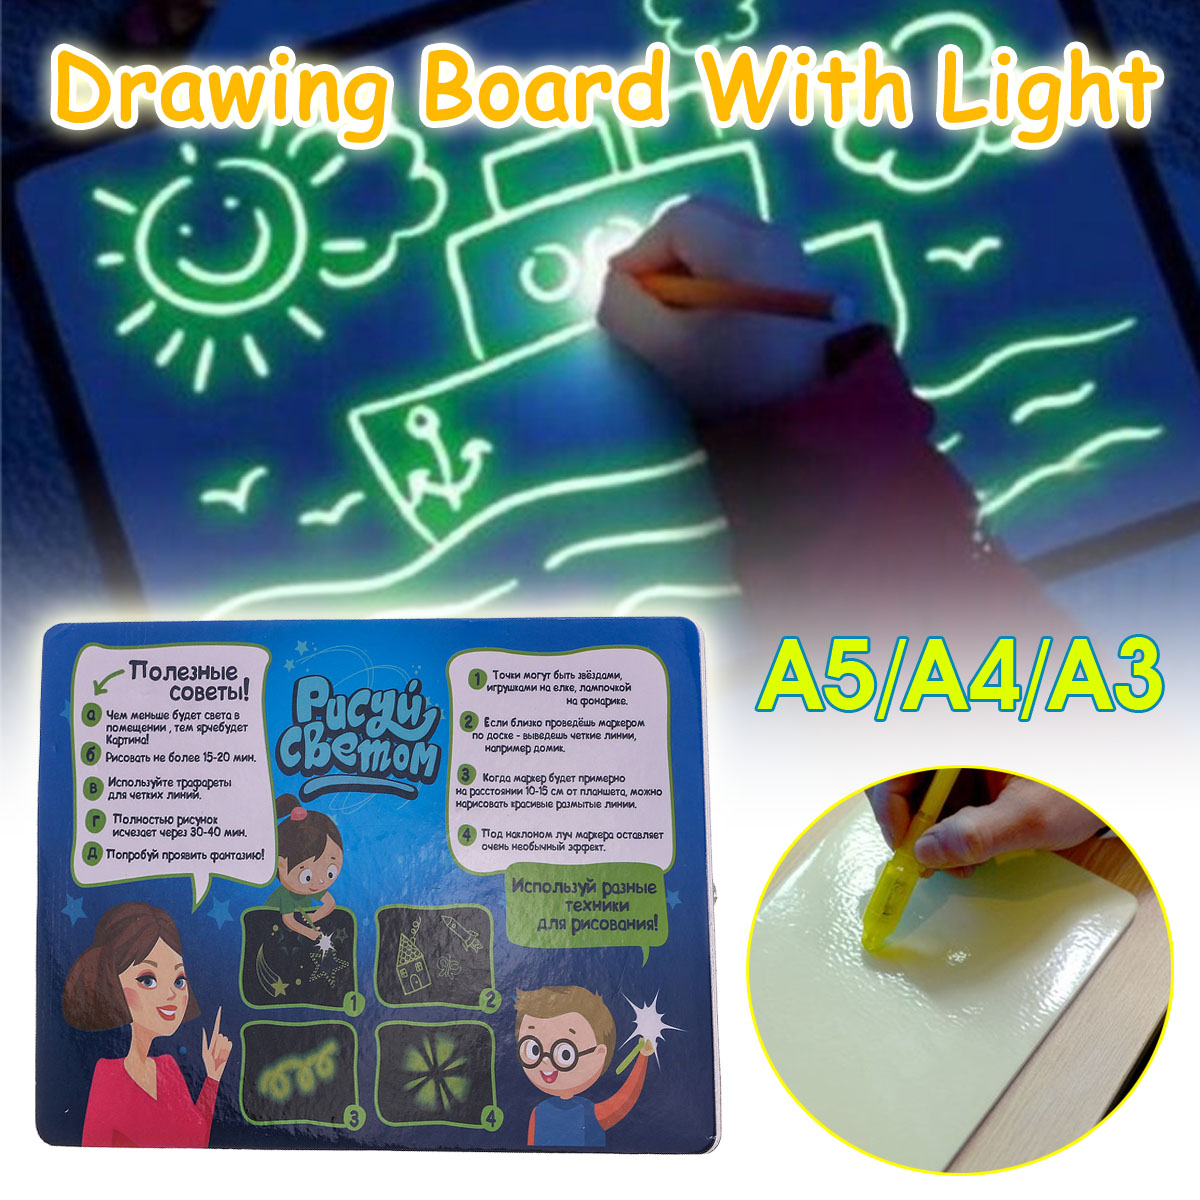 A4-Light-Up-Drawing-Board-Draw-Sketchpad-Board-Children-Kids-Developing-Toy-1676609-2